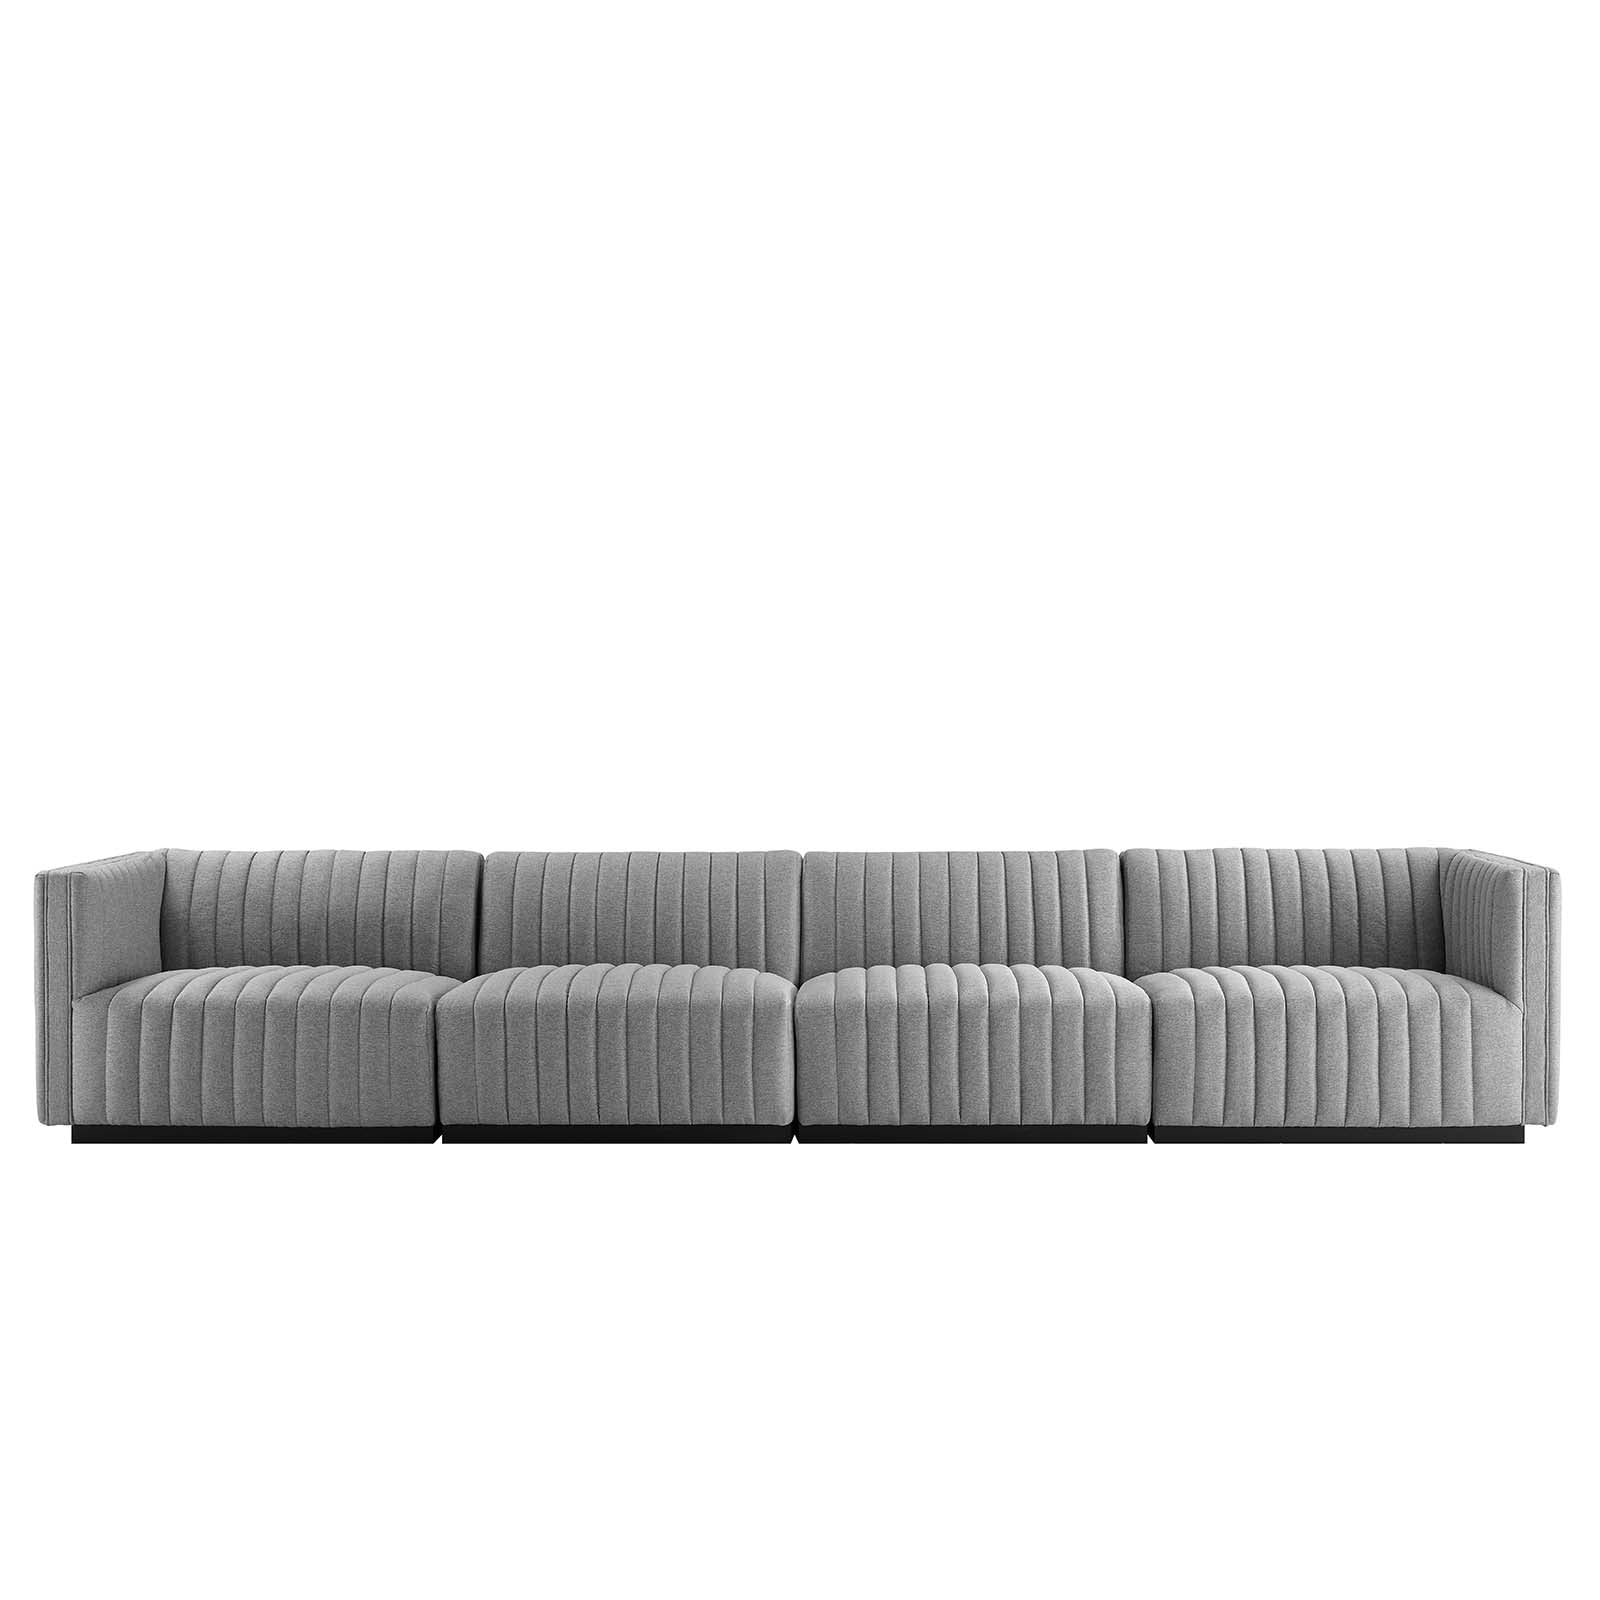 Conjure Channel Tufted Upholstered Fabric 4-Piece Sofa - East Shore Modern Home Furnishings